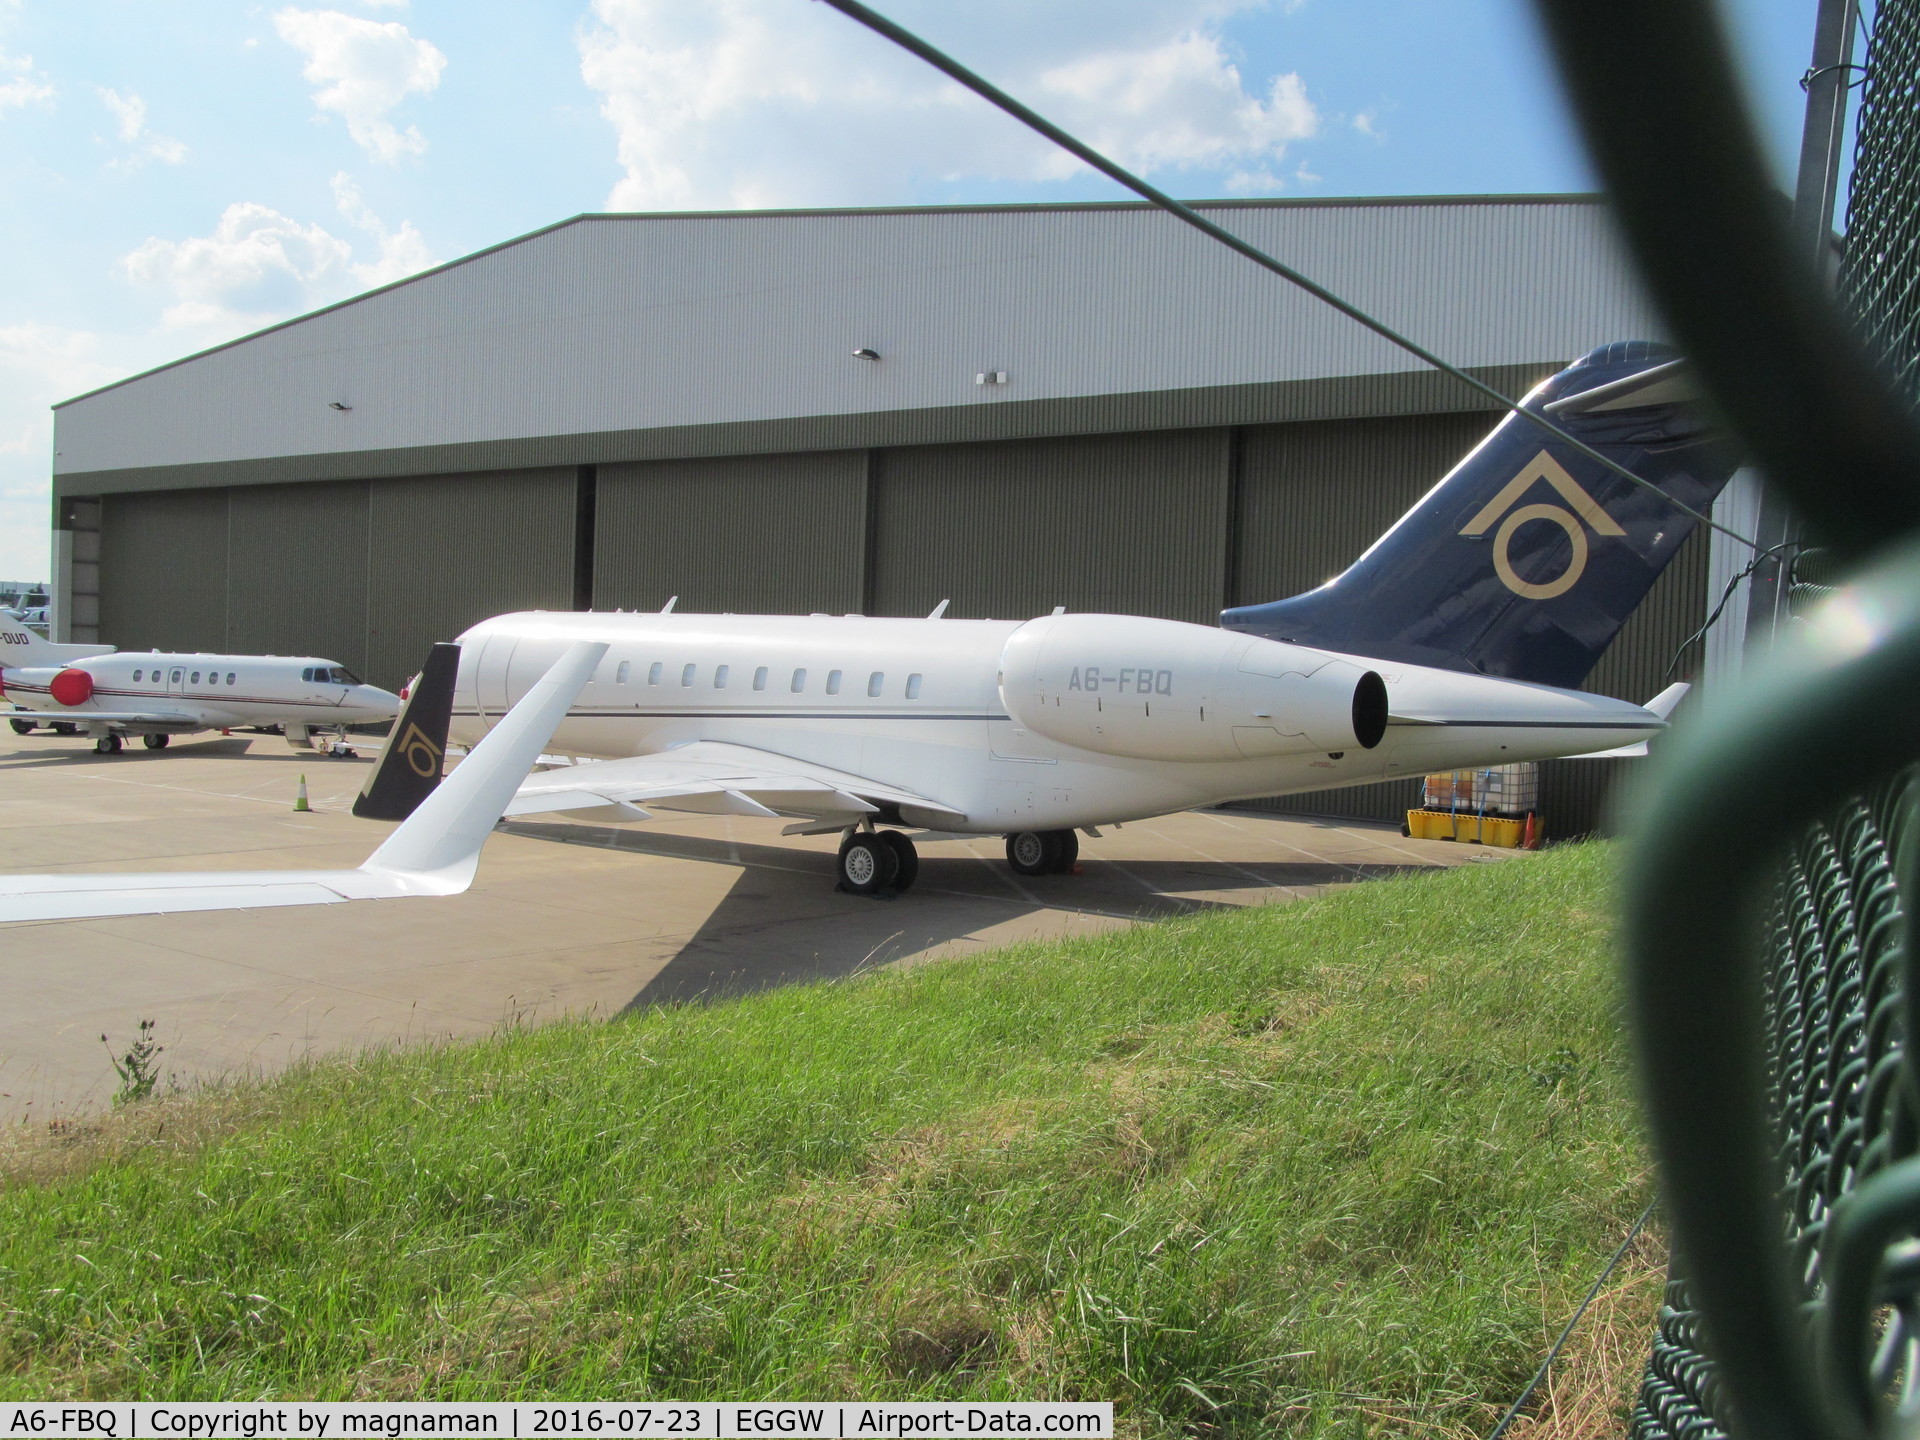 A6-FBQ, 2007 Bombardier BD-700-1A11 Global 5000 C/N 9282, at luton and fence